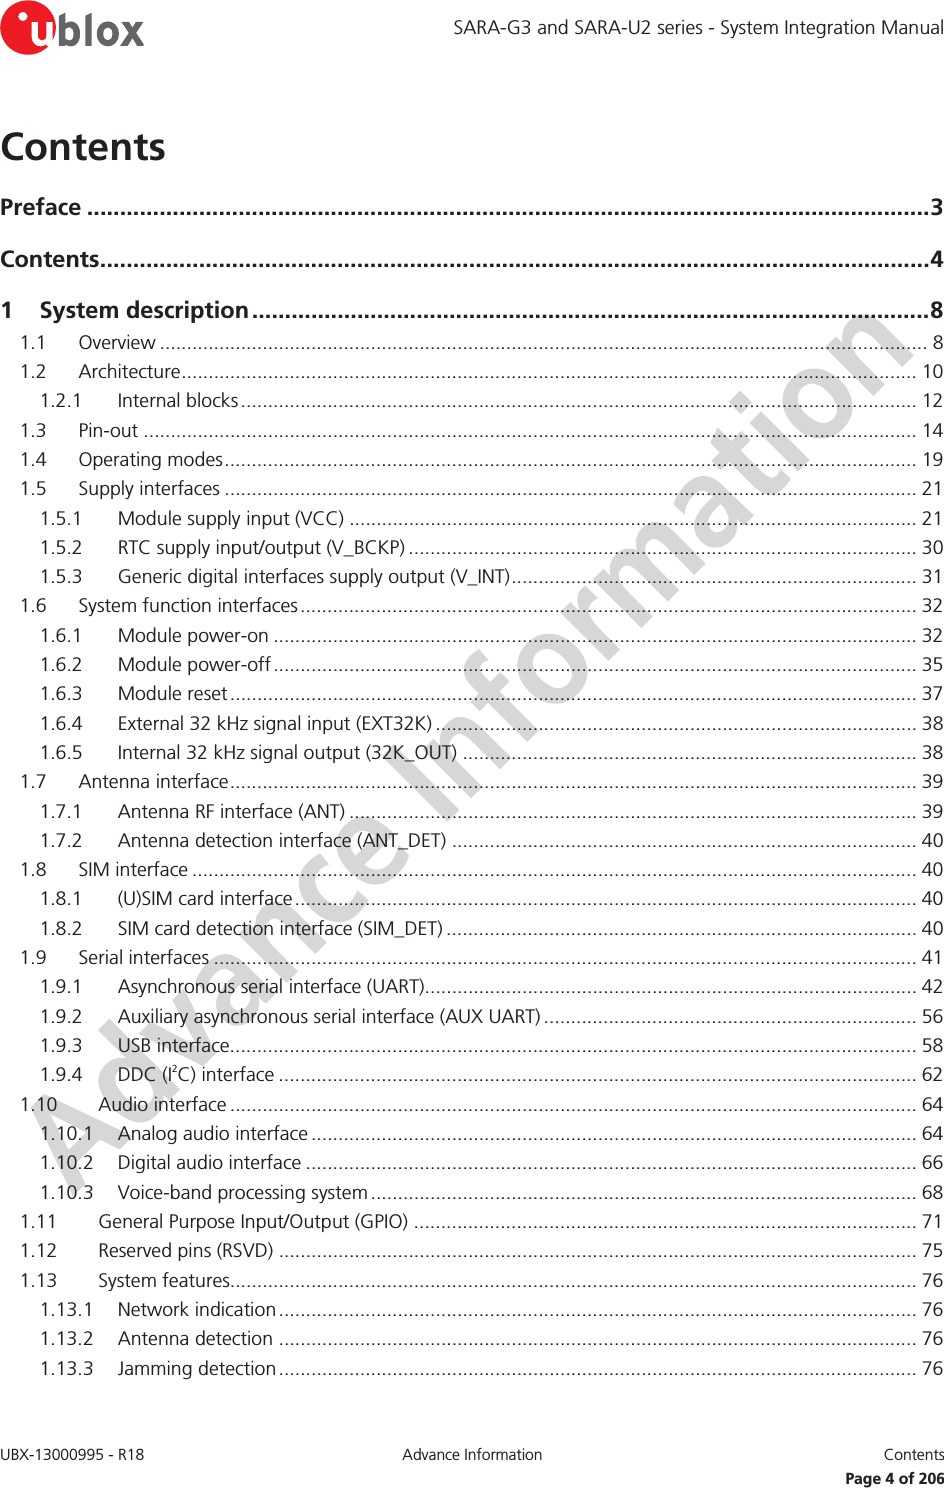 SARA-G3 and SARA-U2 series - System Integration Manual UBX-13000995 - R18  Advance Information  Contents   Page 4 of 206 Contents Preface ................................................................................................................................ 3 Contents .............................................................................................................................. 4 1 System description ....................................................................................................... 8 1.1 Overview .............................................................................................................................................. 8 1.2 Architecture ........................................................................................................................................ 10 1.2.1 Internal blocks ............................................................................................................................. 12 1.3 Pin-out ............................................................................................................................................... 14 1.4 Operating modes ................................................................................................................................ 19 1.5 Supply interfaces ................................................................................................................................ 21 1.5.1 Module supply input (VCC) ......................................................................................................... 21 1.5.2 RTC supply input/output (V_BCKP) .............................................................................................. 30 1.5.3 Generic digital interfaces supply output (V_INT) ........................................................................... 31 1.6 System function interfaces .................................................................................................................. 32 1.6.1 Module power-on ....................................................................................................................... 32 1.6.2 Module power-off ....................................................................................................................... 35 1.6.3 Module reset ............................................................................................................................... 37 1.6.4 External 32 kHz signal input (EXT32K) ......................................................................................... 38 1.6.5 Internal 32 kHz signal output (32K_OUT) .................................................................................... 38 1.7 Antenna interface ............................................................................................................................... 39 1.7.1 Antenna RF interface (ANT) ......................................................................................................... 39 1.7.2 Antenna detection interface (ANT_DET) ...................................................................................... 40 1.8 SIM interface ...................................................................................................................................... 40 1.8.1 (U)SIM card interface ................................................................................................................... 40 1.8.2 SIM card detection interface (SIM_DET) ....................................................................................... 40 1.9 Serial interfaces .................................................................................................................................. 41 1.9.1 Asynchronous serial interface (UART)........................................................................................... 42 1.9.2 Auxiliary asynchronous serial interface (AUX UART) ..................................................................... 56 1.9.3 USB interface............................................................................................................................... 58 1.9.4 DDC (I2C) interface ...................................................................................................................... 62 1.10 Audio interface ............................................................................................................................... 64 1.10.1 Analog audio interface ................................................................................................................ 64 1.10.2 Digital audio interface ................................................................................................................. 66 1.10.3 Voice-band processing system ..................................................................................................... 68 1.11 General Purpose Input/Output (GPIO) ............................................................................................. 71 1.12 Reserved pins (RSVD) ...................................................................................................................... 75 1.13 System features............................................................................................................................... 76 1.13.1 Network indication ...................................................................................................................... 76 1.13.2 Antenna detection ...................................................................................................................... 76 1.13.3 Jamming detection ...................................................................................................................... 76 